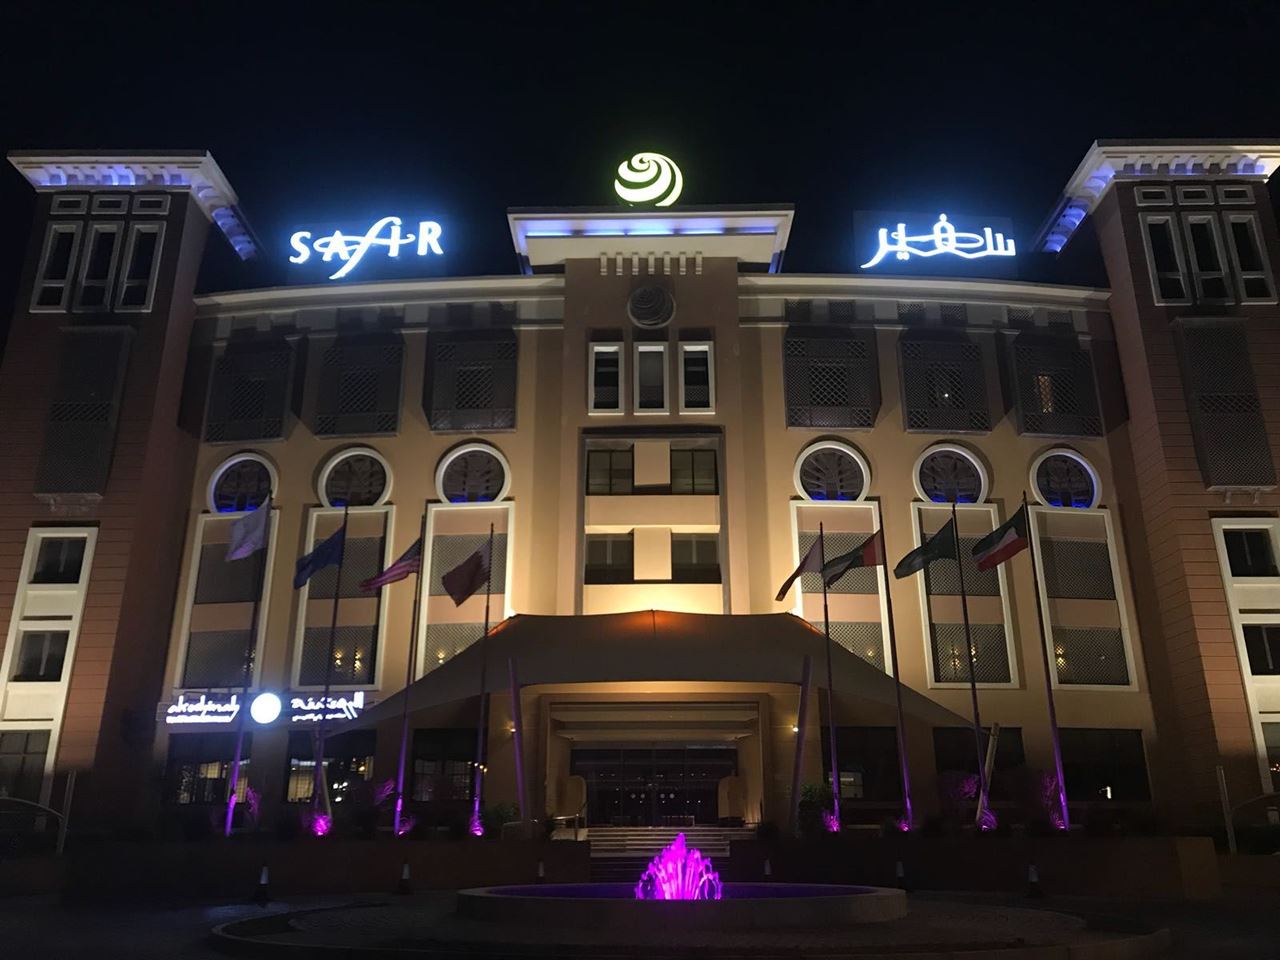 Safir Fintas Kuwait Hotel participated in Breast Cancer Awareness Campaign